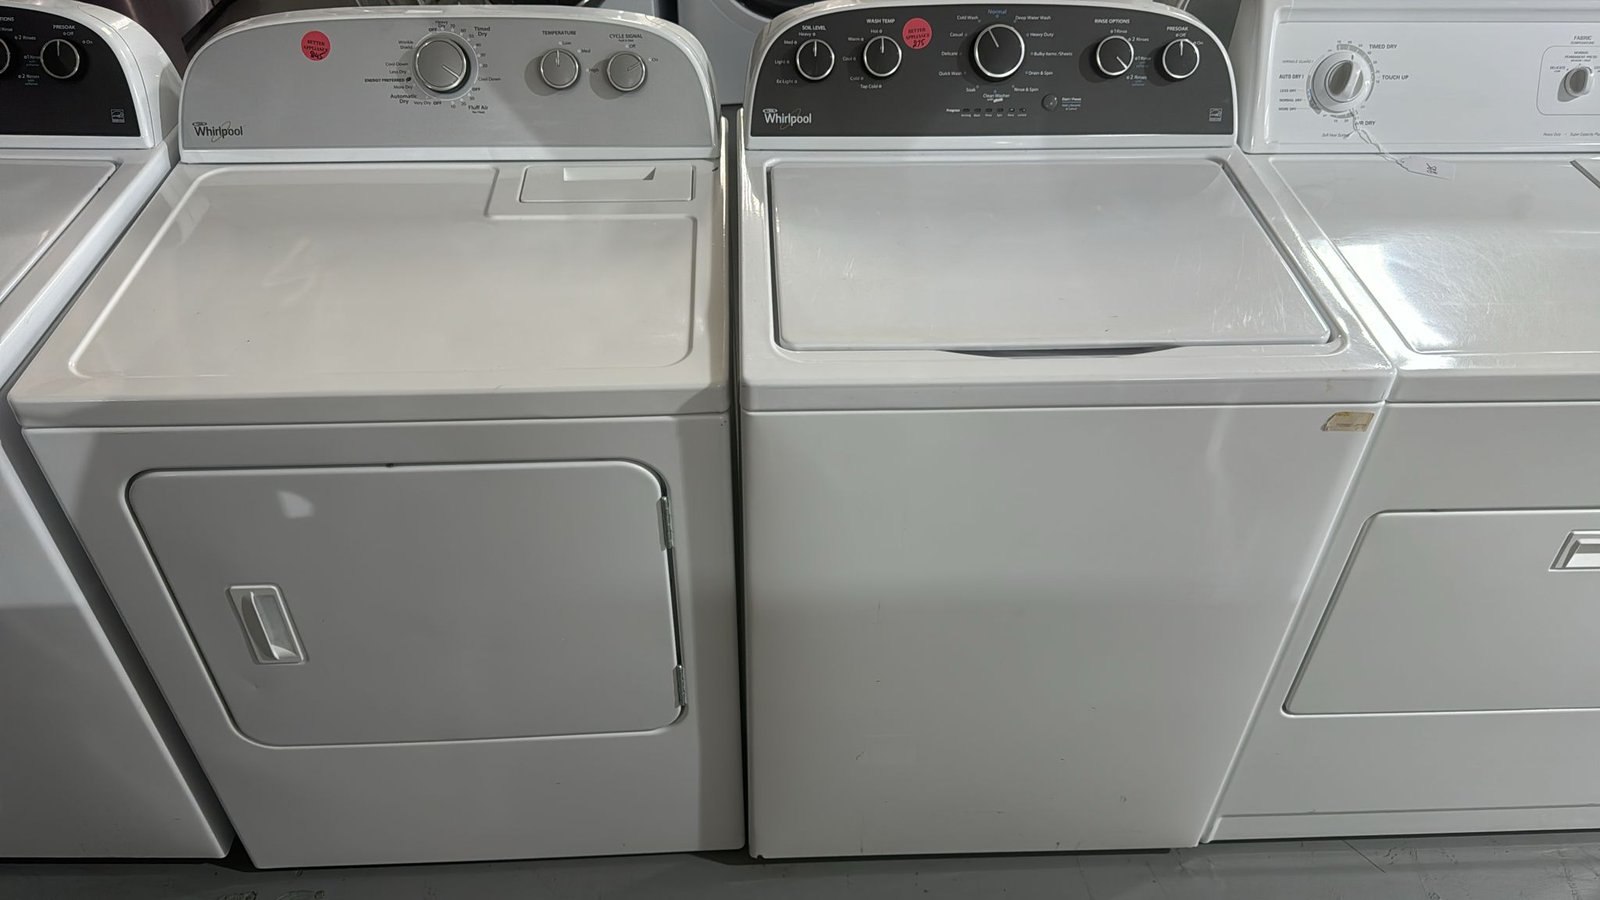 Whirlpool Used Washer Dryer Set